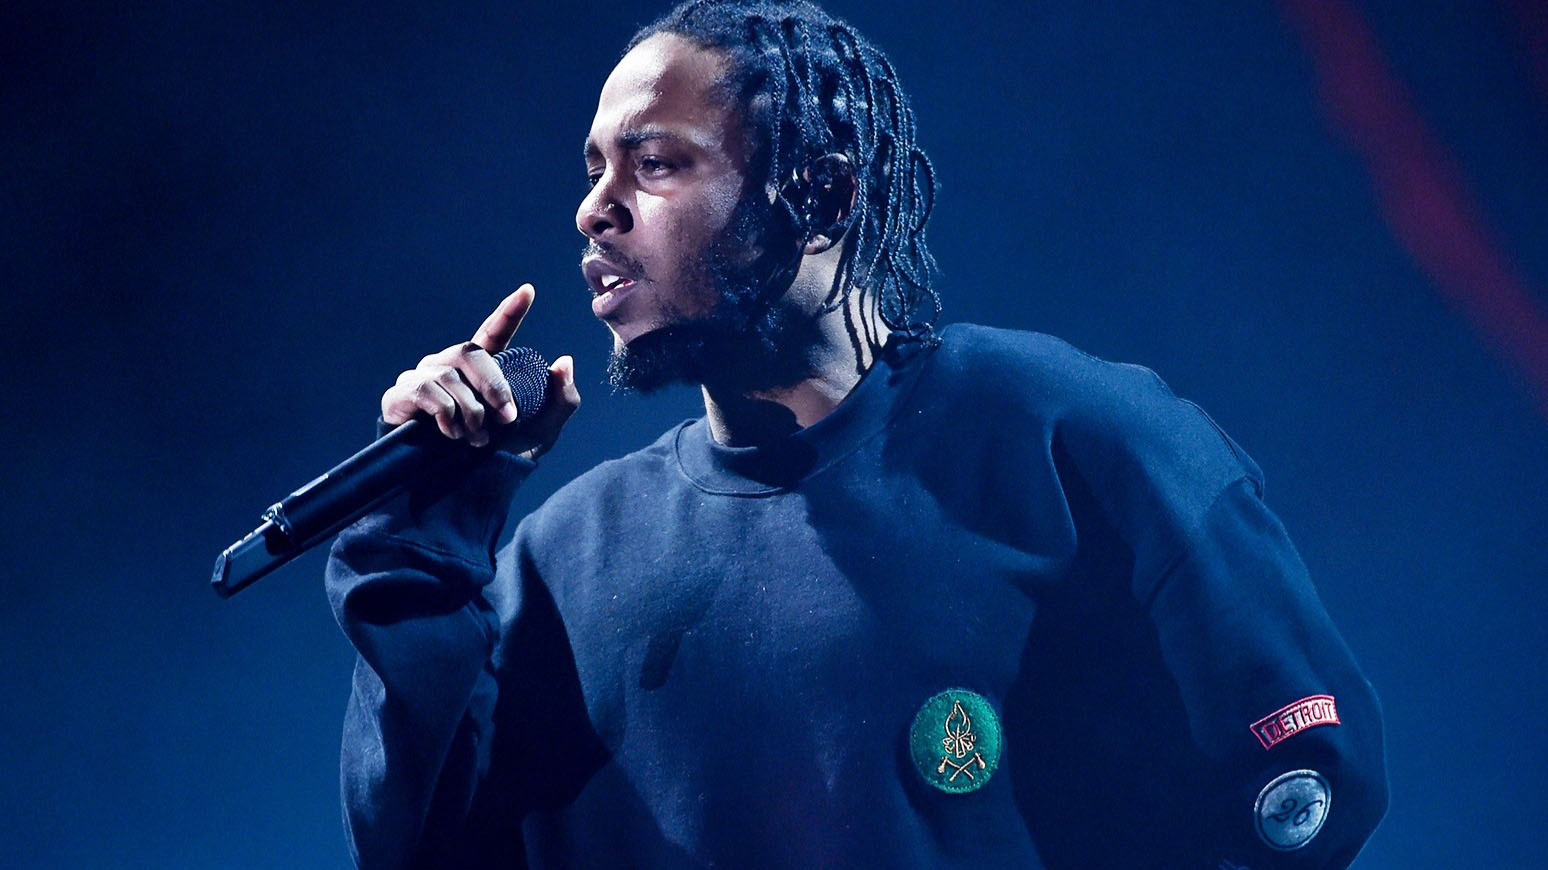 Kendrick Lamar Duckworth (born June 17, 1987) is an American rapper, songwriter, and record producer. Since his mainstream debut in 2012 with Good Kid...